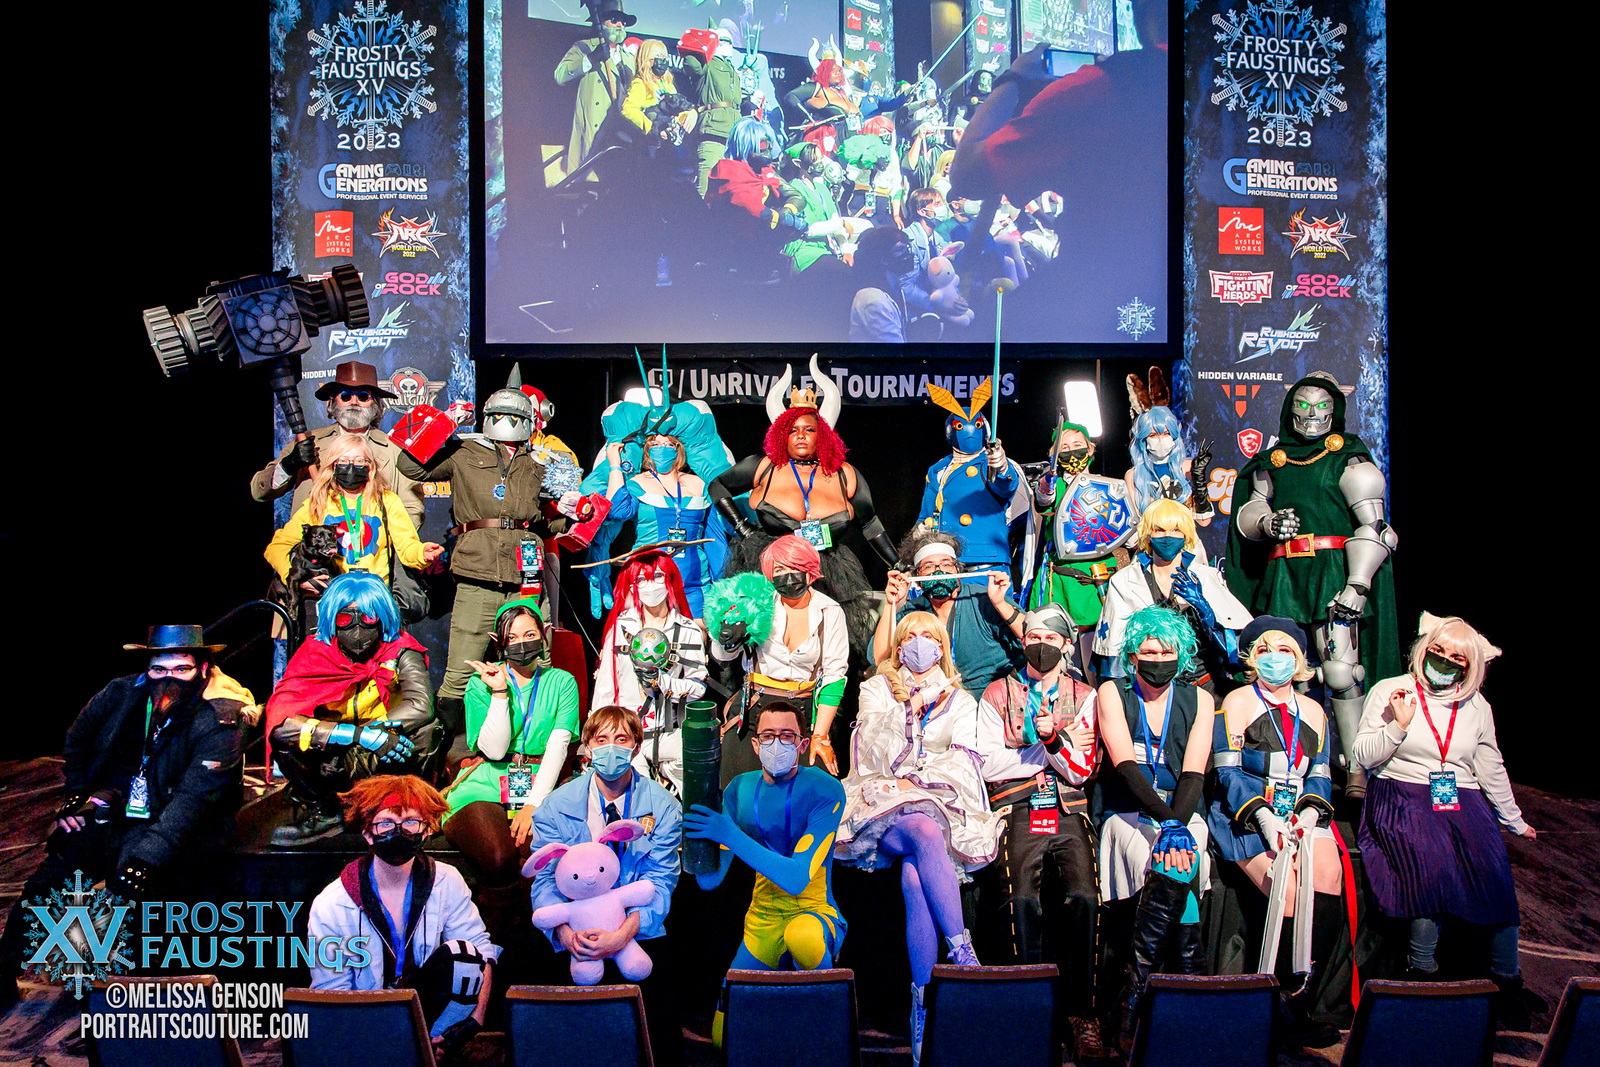 Cosplay Contest at Frosty Faustings XVI 2024! Frosty Faustings